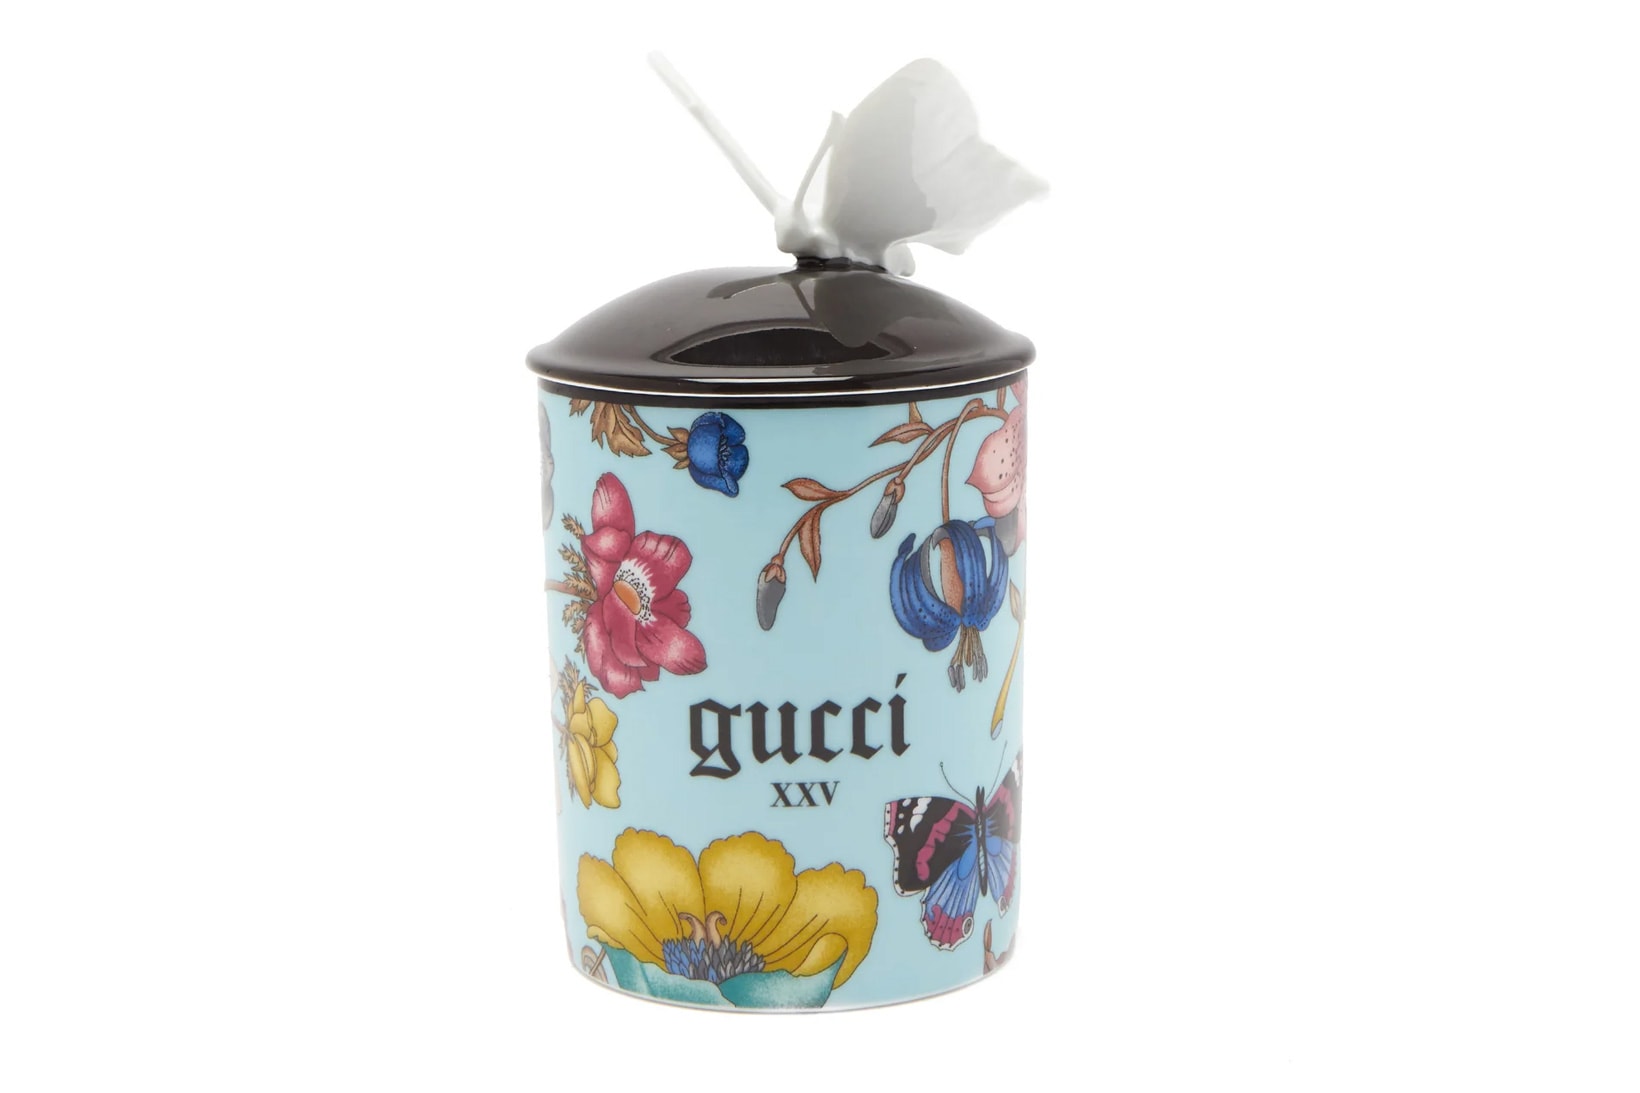 gucci home accessories souvenir from rome collection flora scented candles porcelain trinket jewelry boxes trays star eye mugs